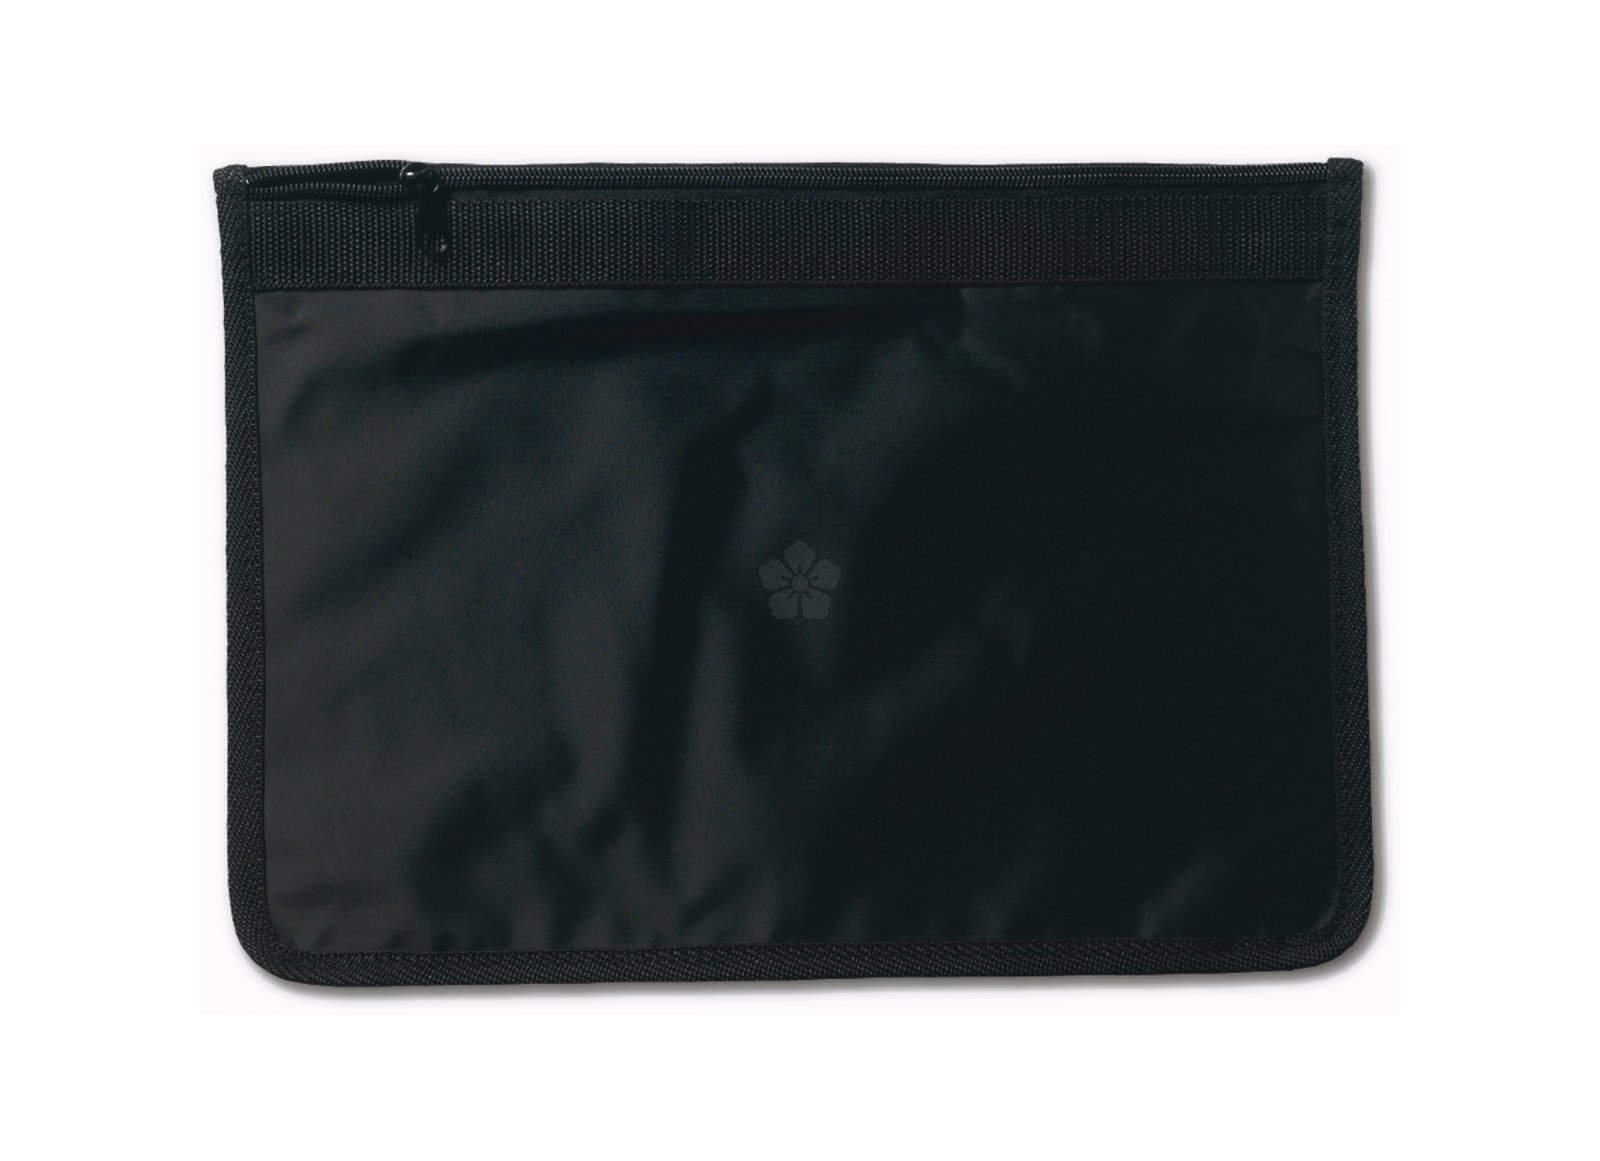 Promotional A4 Nylon Document Bag, Personalised by MoJo Promotions